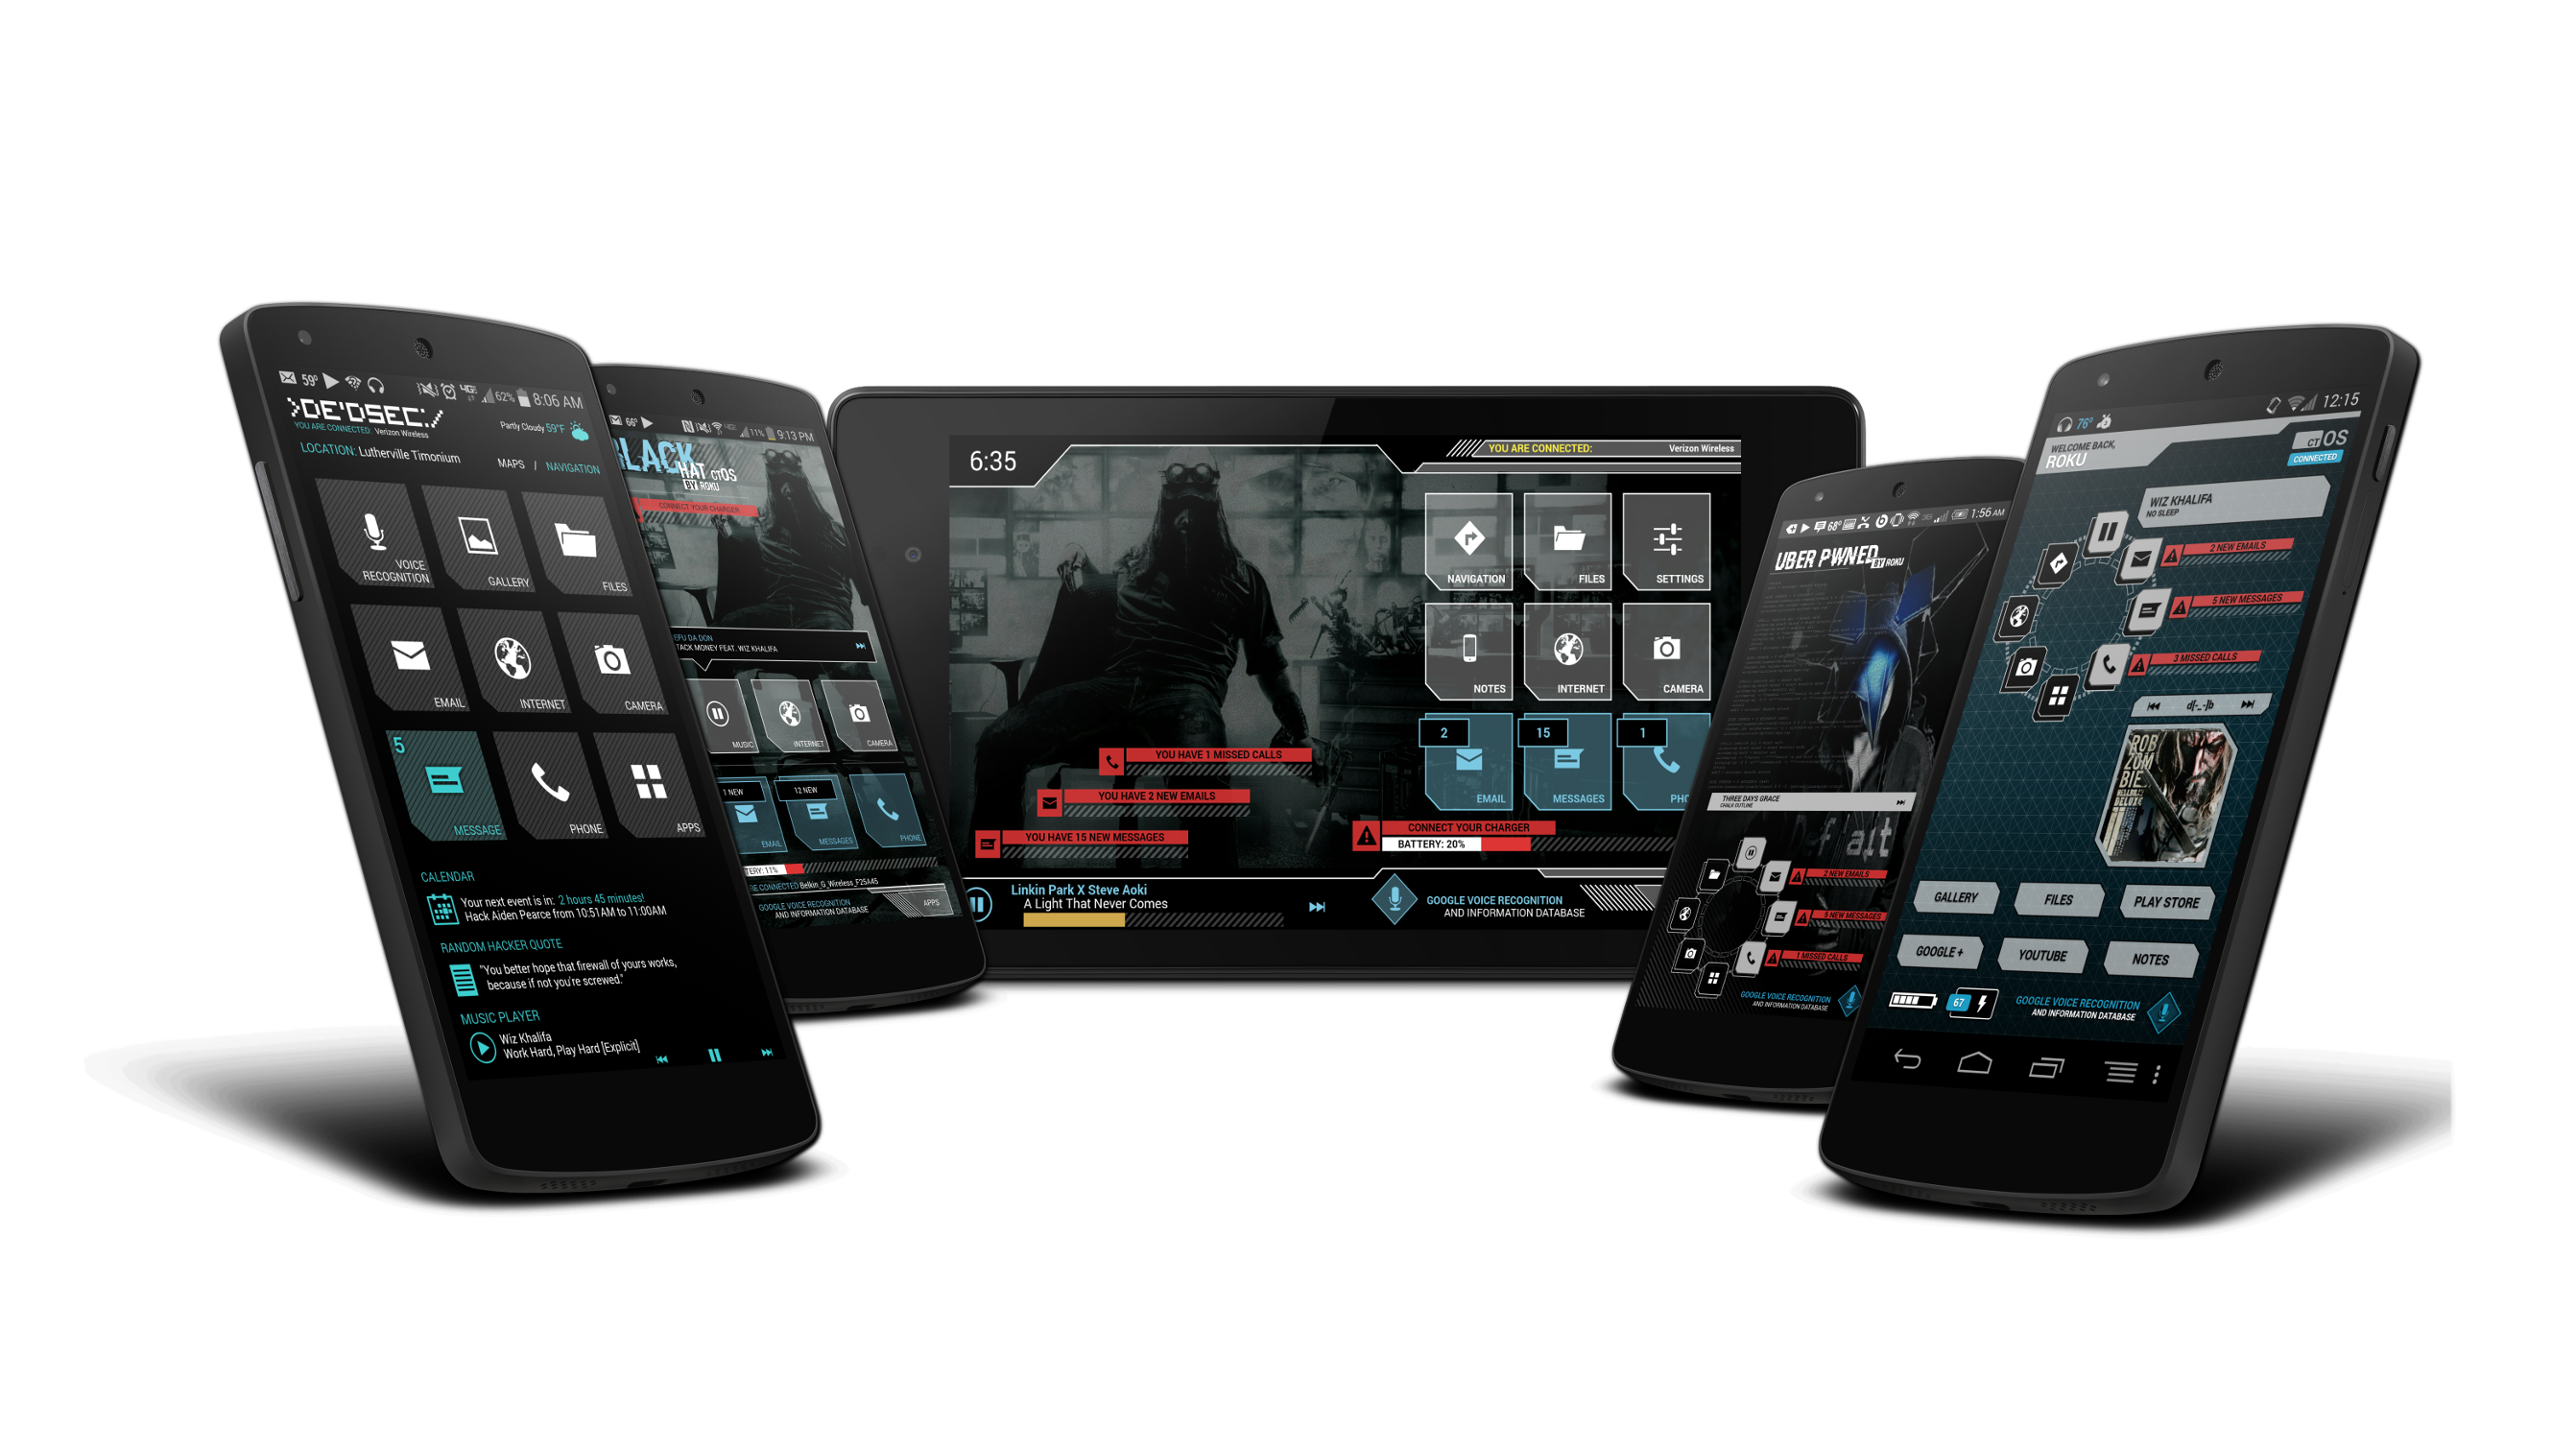 Android application Watch Dogs ctOS Update screenshort